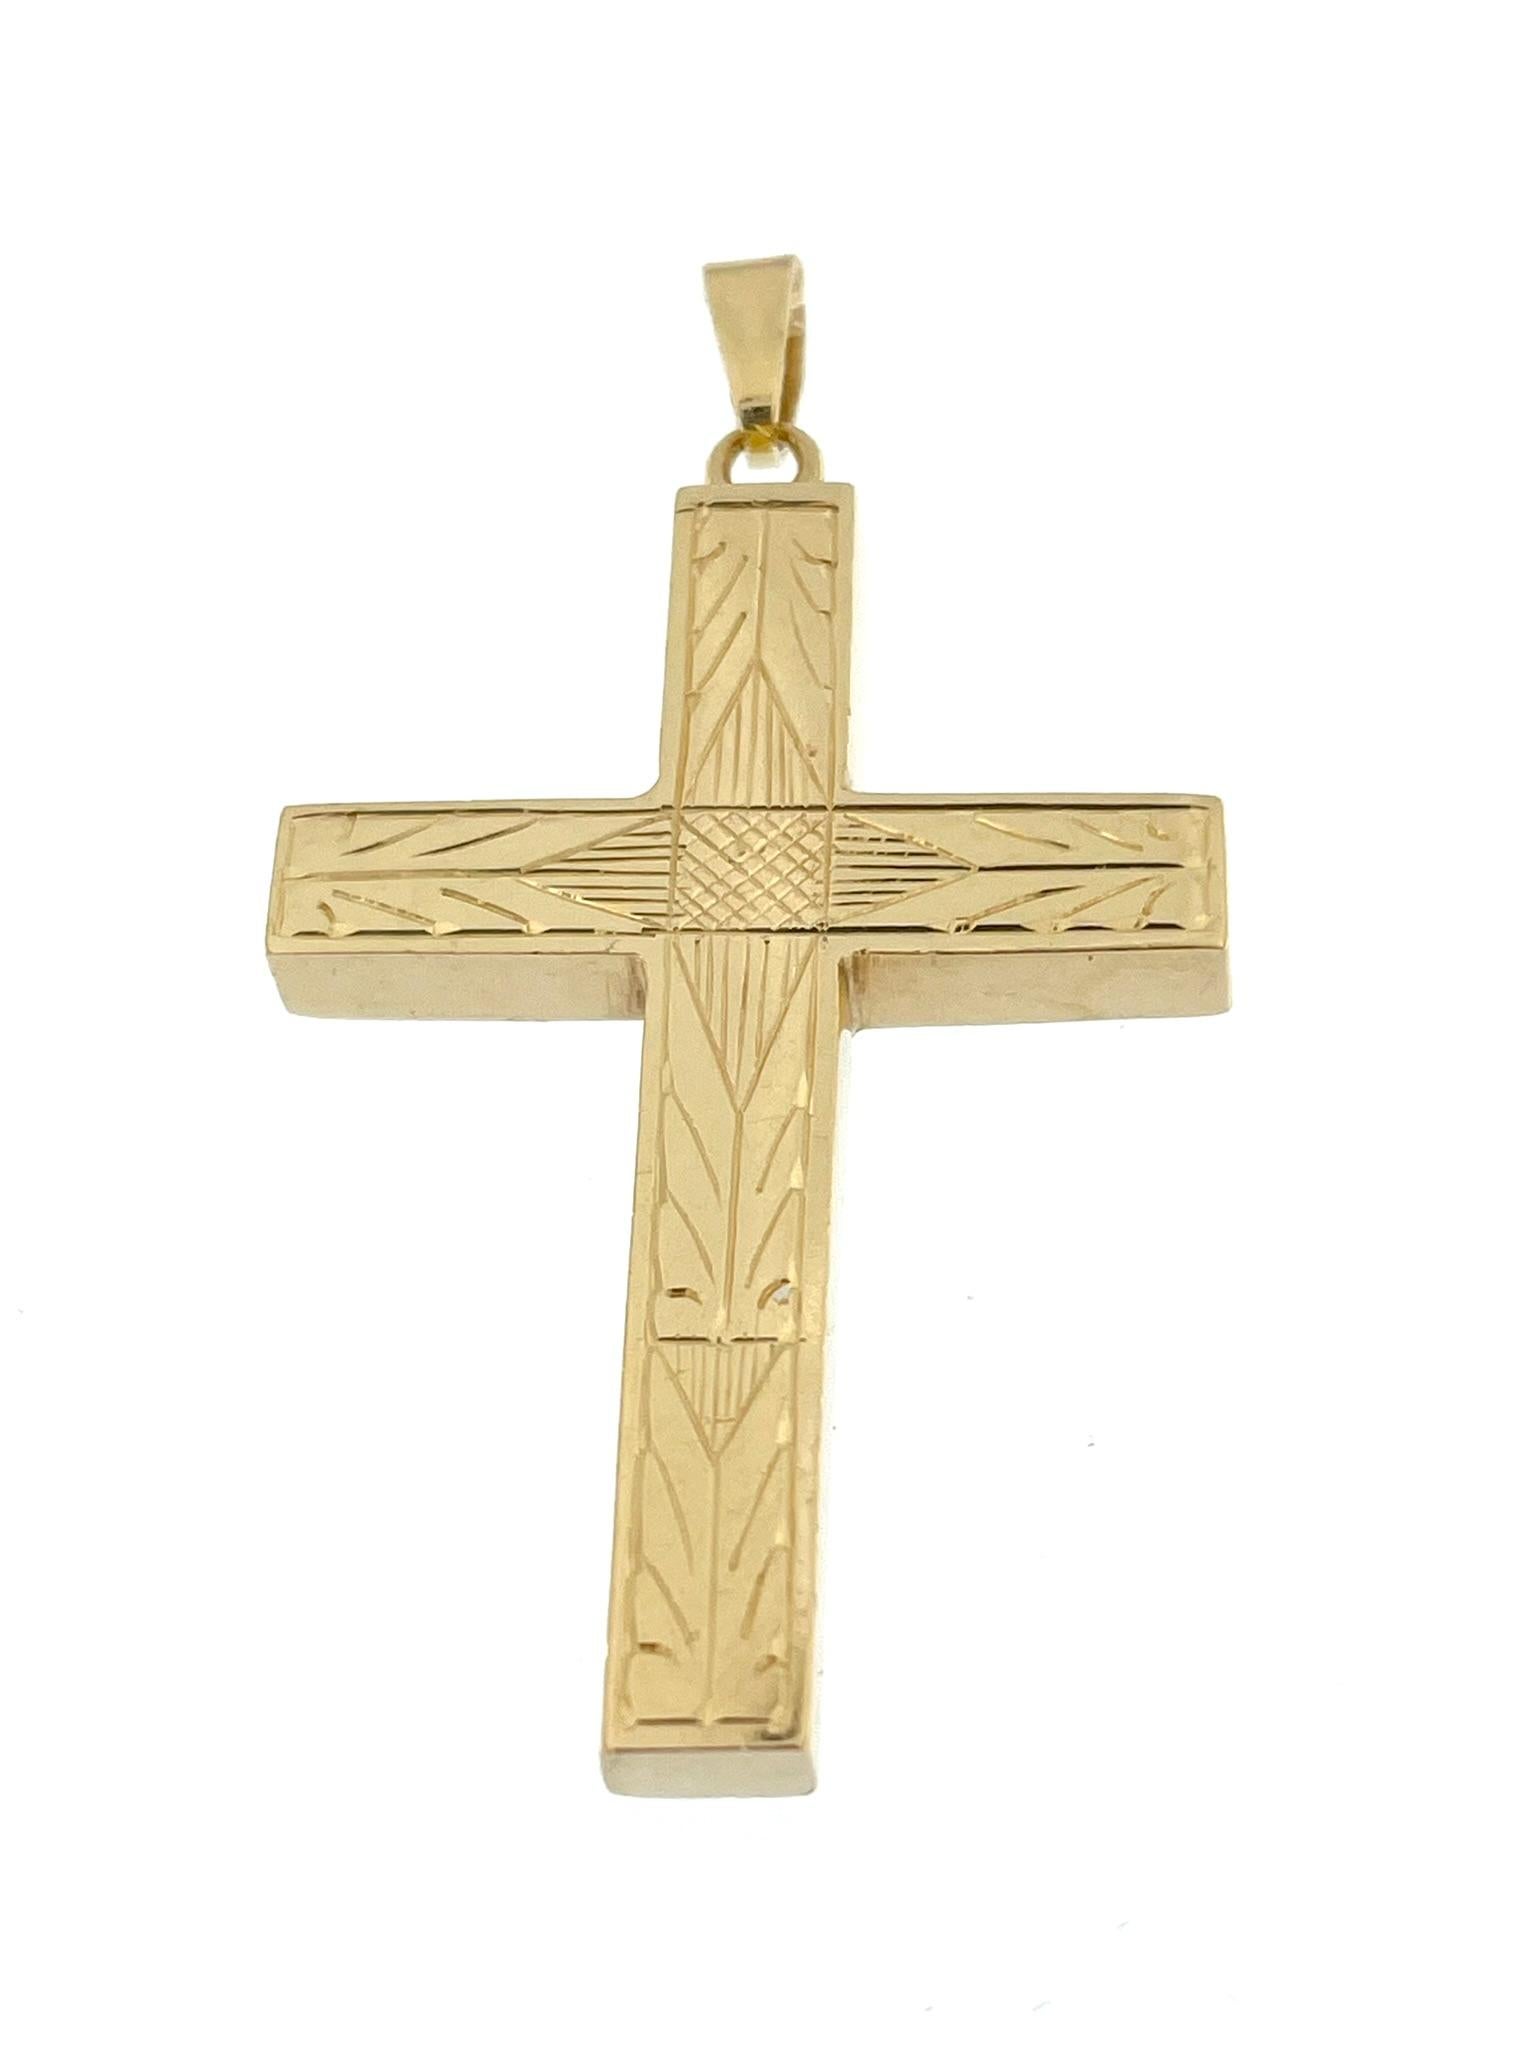 The Vintage French Cross in 18-karat yellow gold is a distinctive and elegant piece characterized by its unique design and craftsmanship. The use of high-quality 18-karat yellow gold gives the cross a rich and enduring quality.

The cross features a